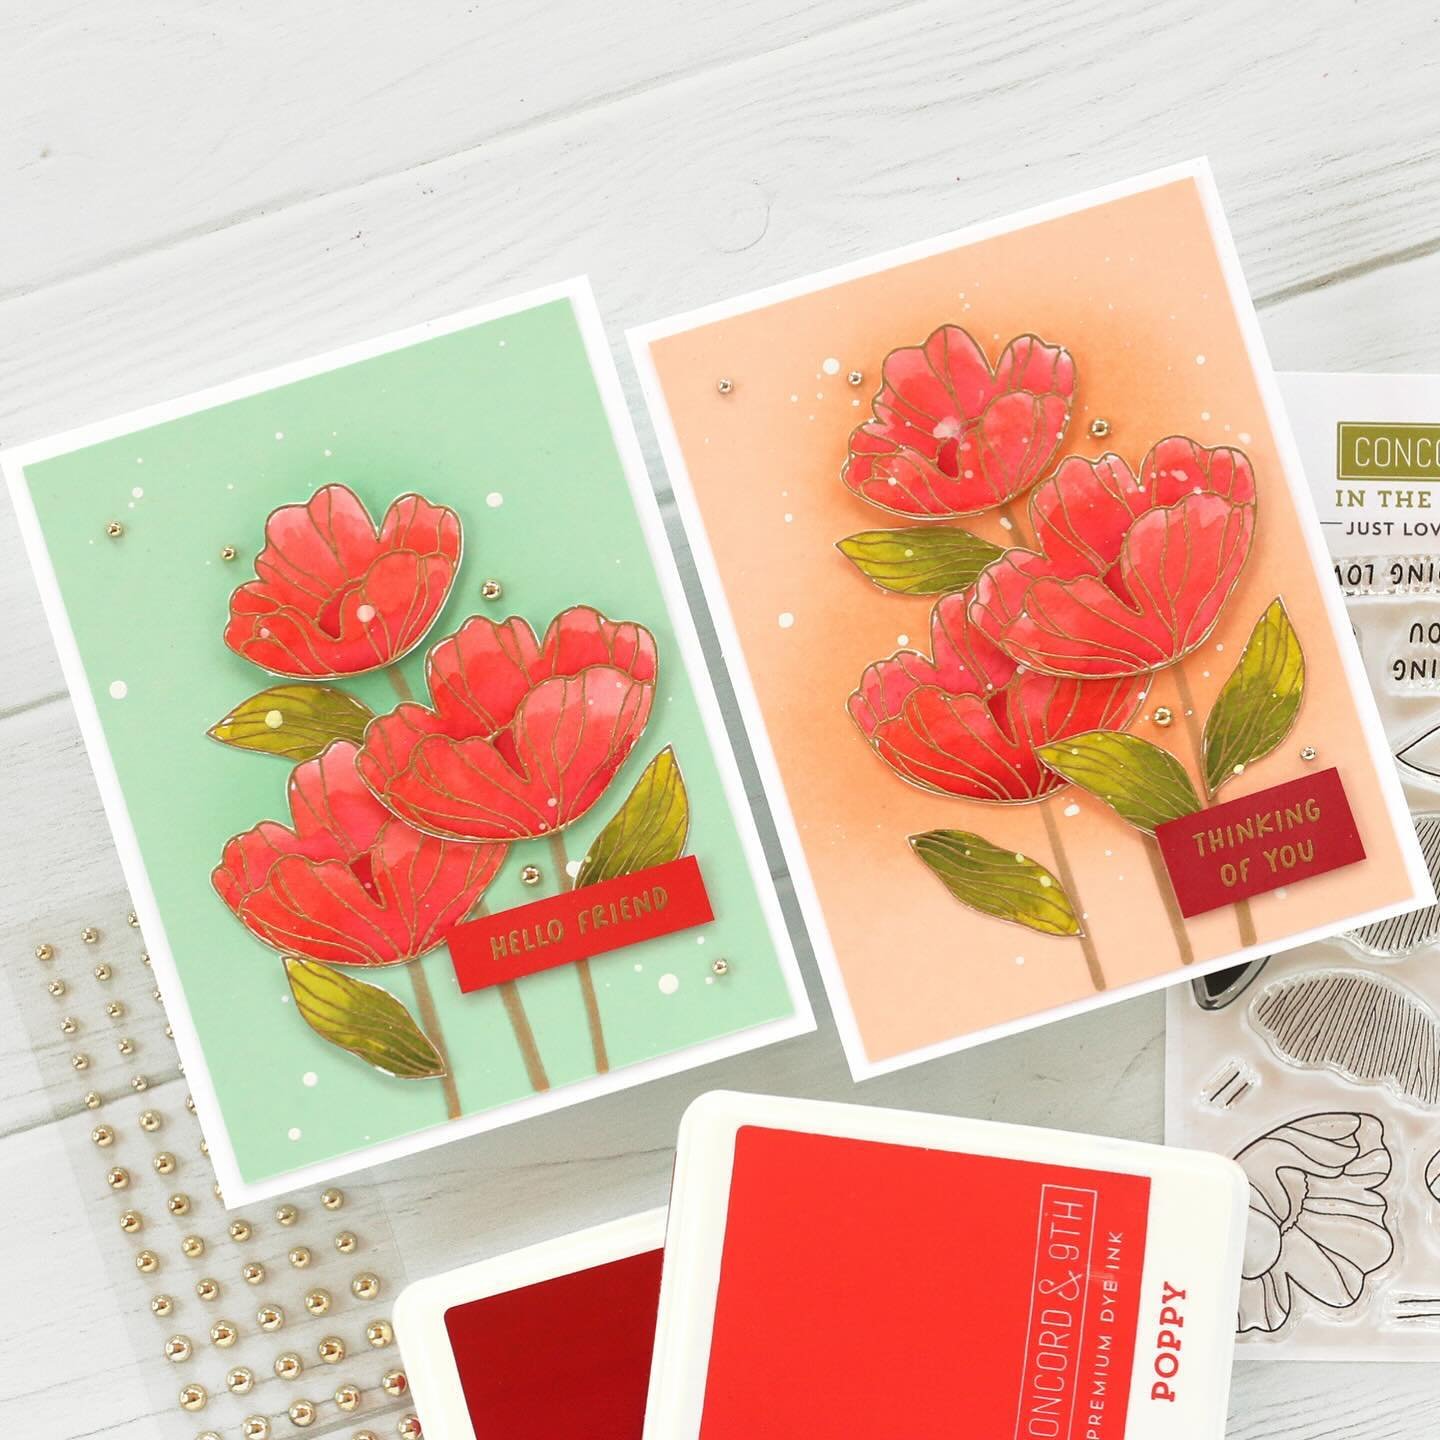 Two new card creations that I have fallen in love with! ❤️
.
The @concordand9th In the Classroom spring event included beautiful cards by @jennifermcguireink and @starofmay that I just loved, but it was the bonus card designed by Kristina that had my